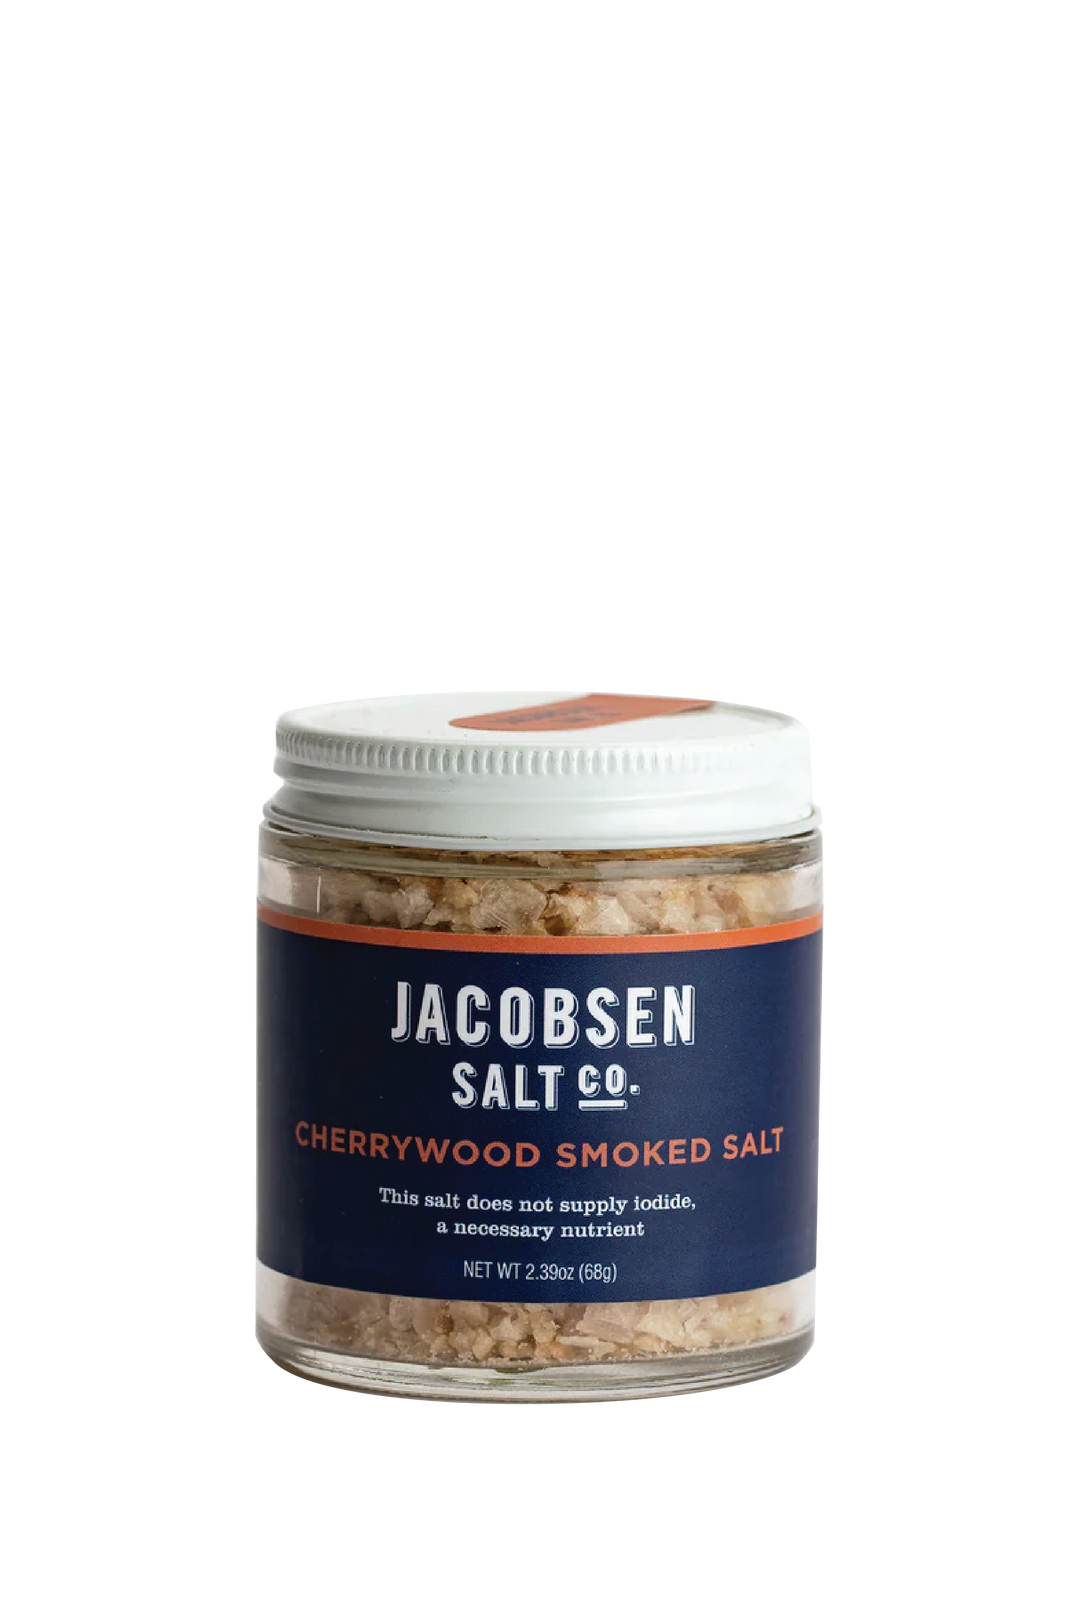 A 2.39 Oz Glass Jar Of Jacobsen Salt Co's Cherrywood Smoked Salt, Featuring a blue label and white lid on a white background